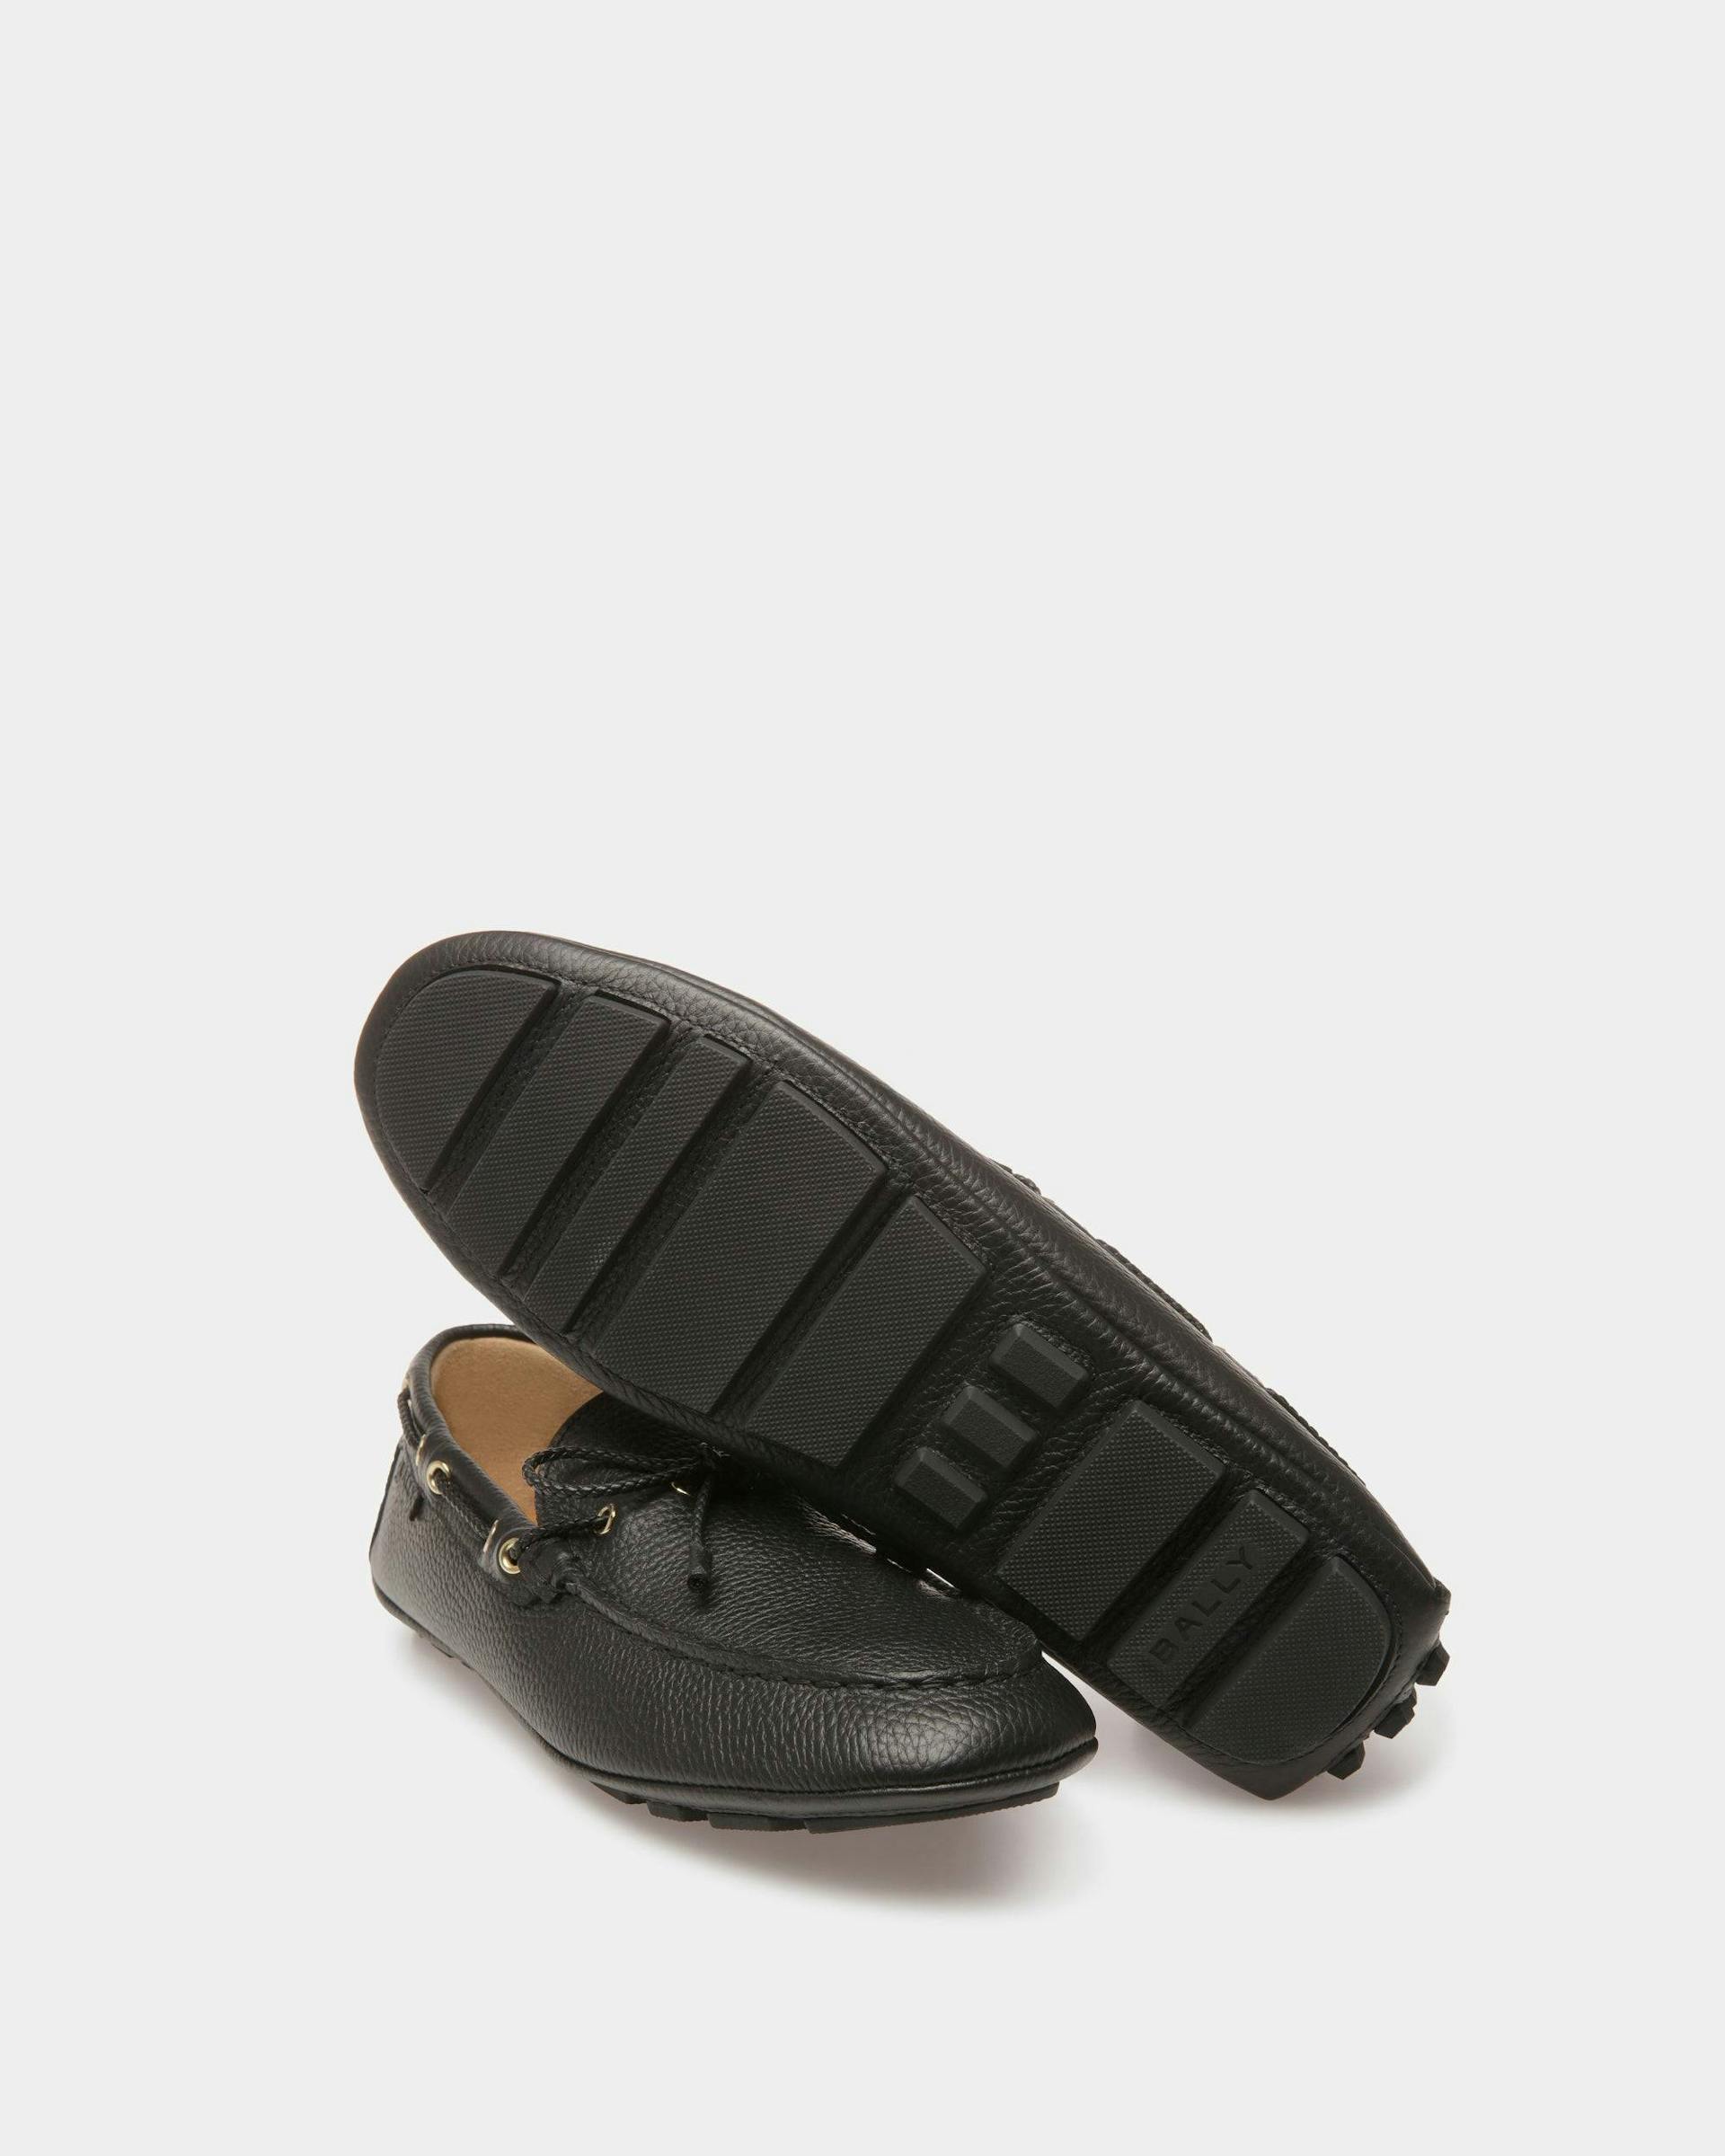 Kerbs Drivers In Black Leather - Men's - Bally - 04